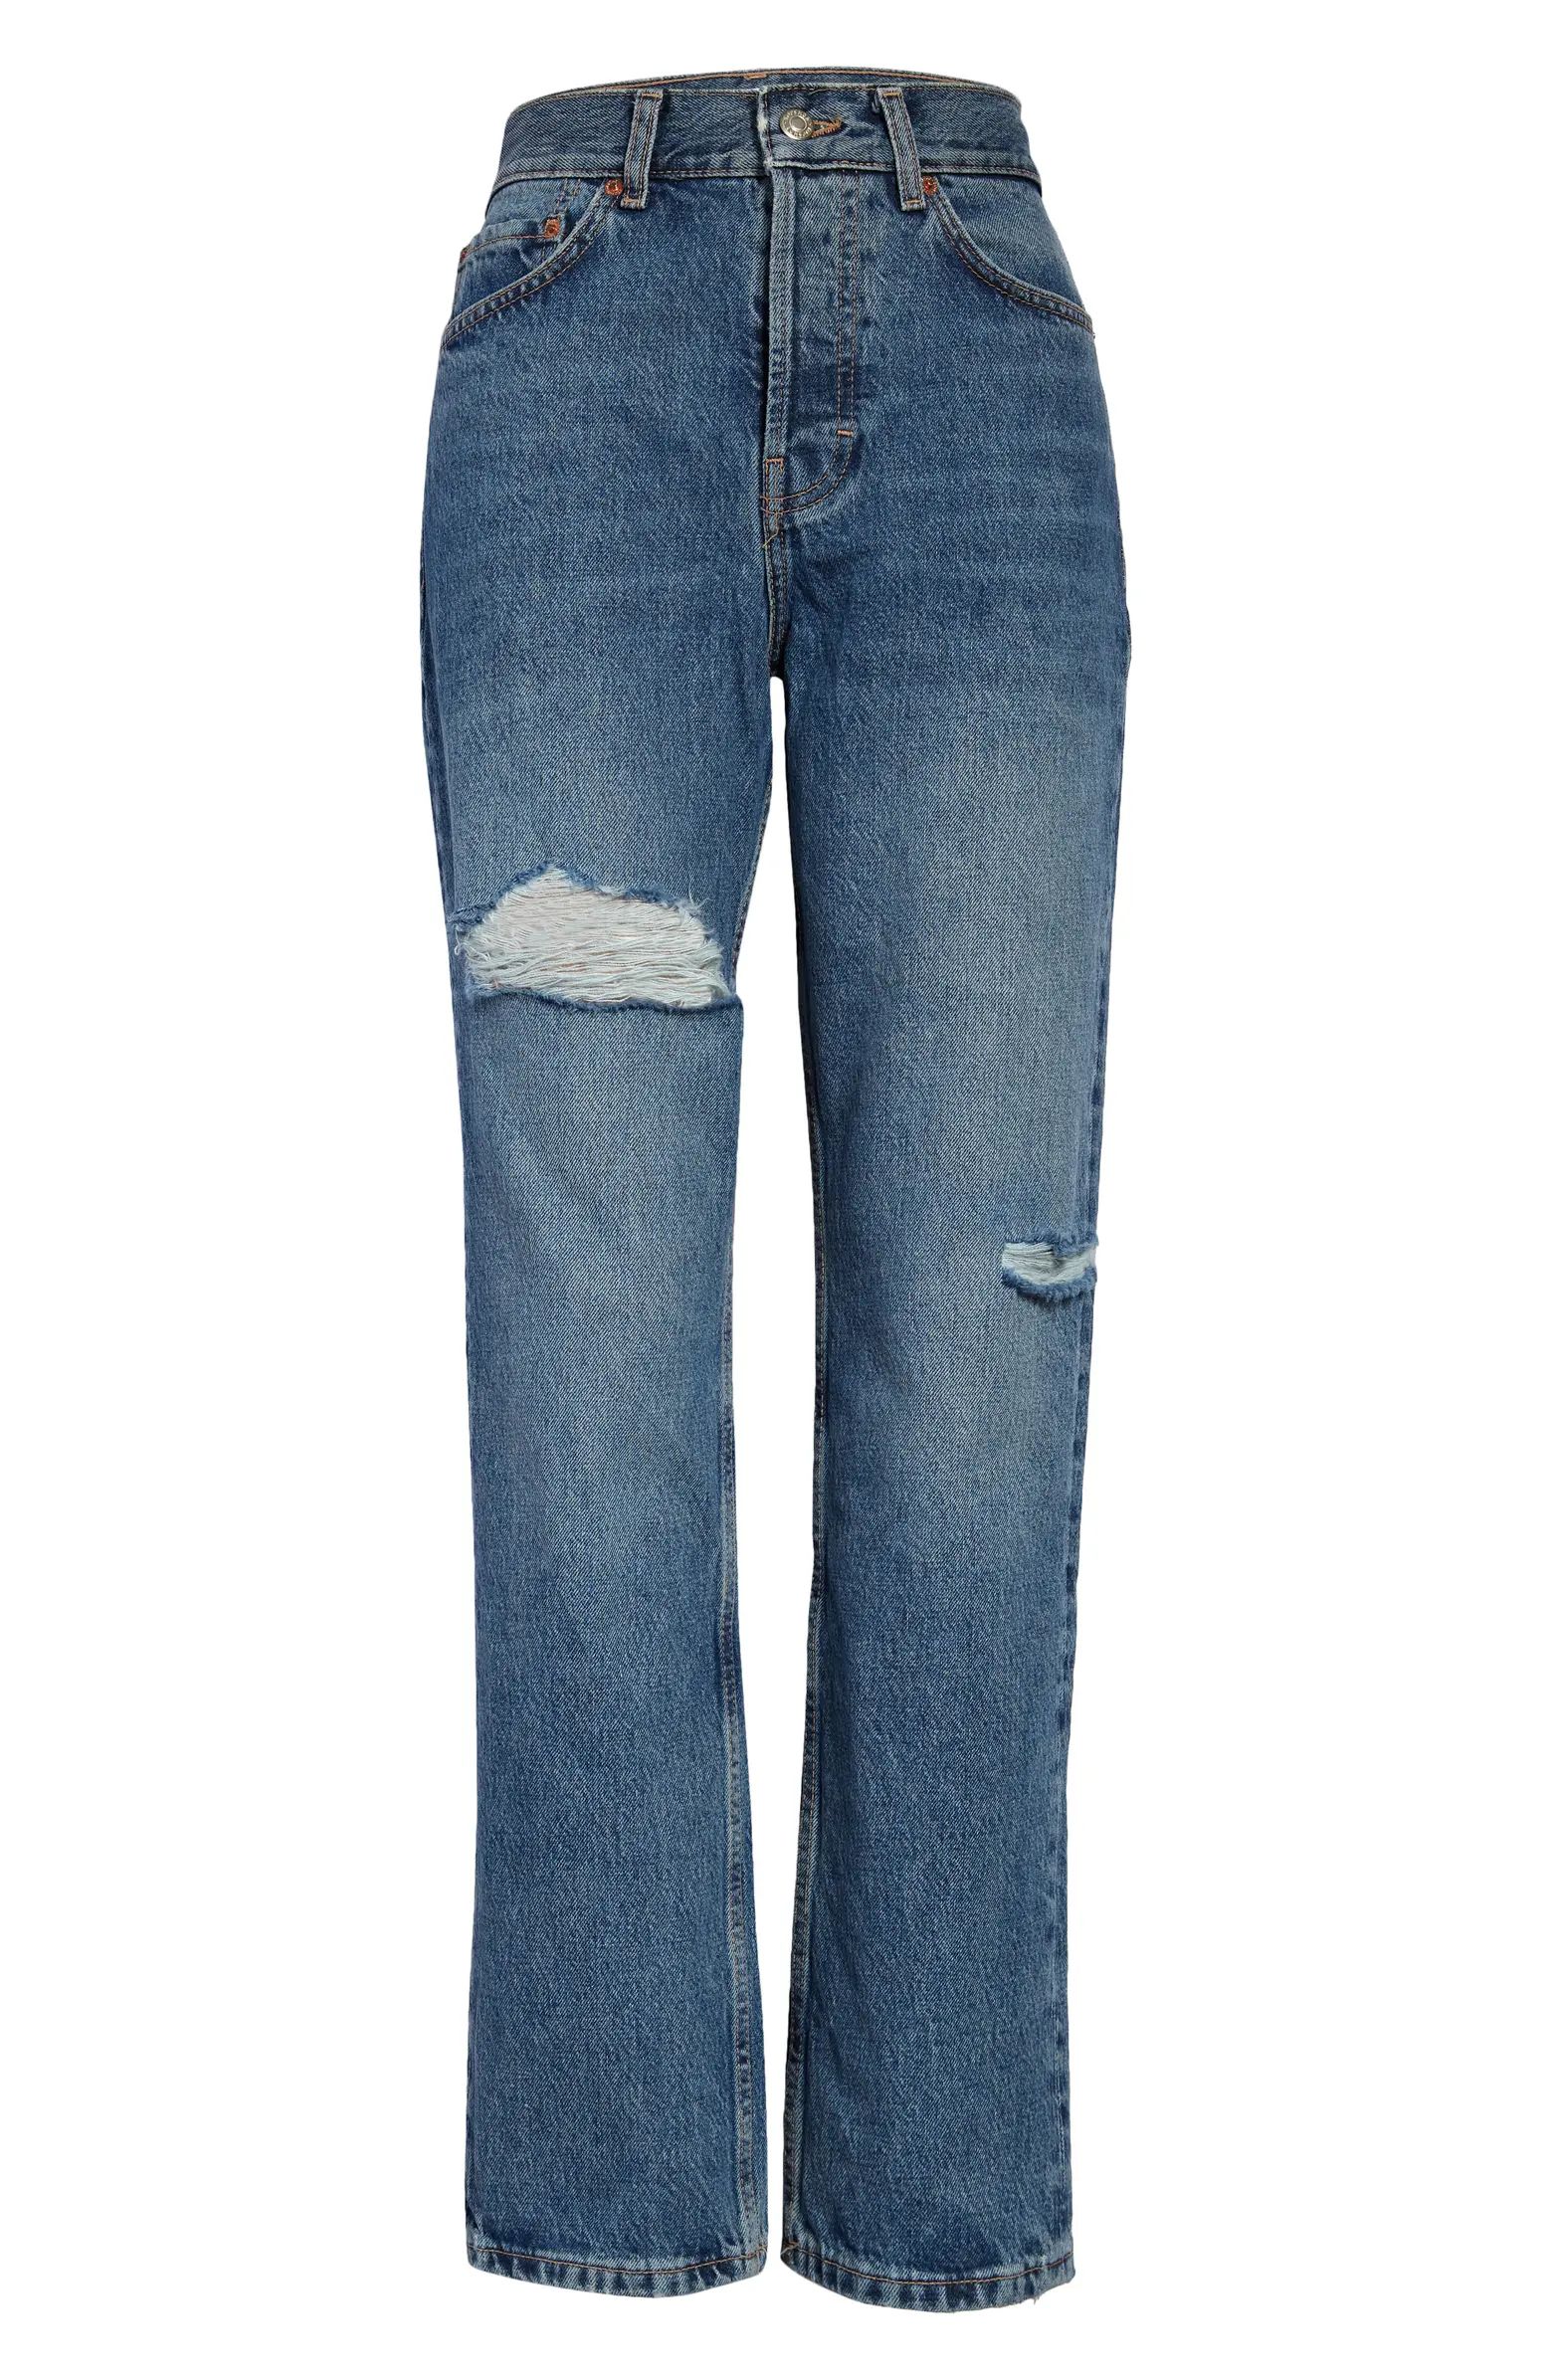 Brixton Ripped High Waist Dad Jeans | Nordstrom